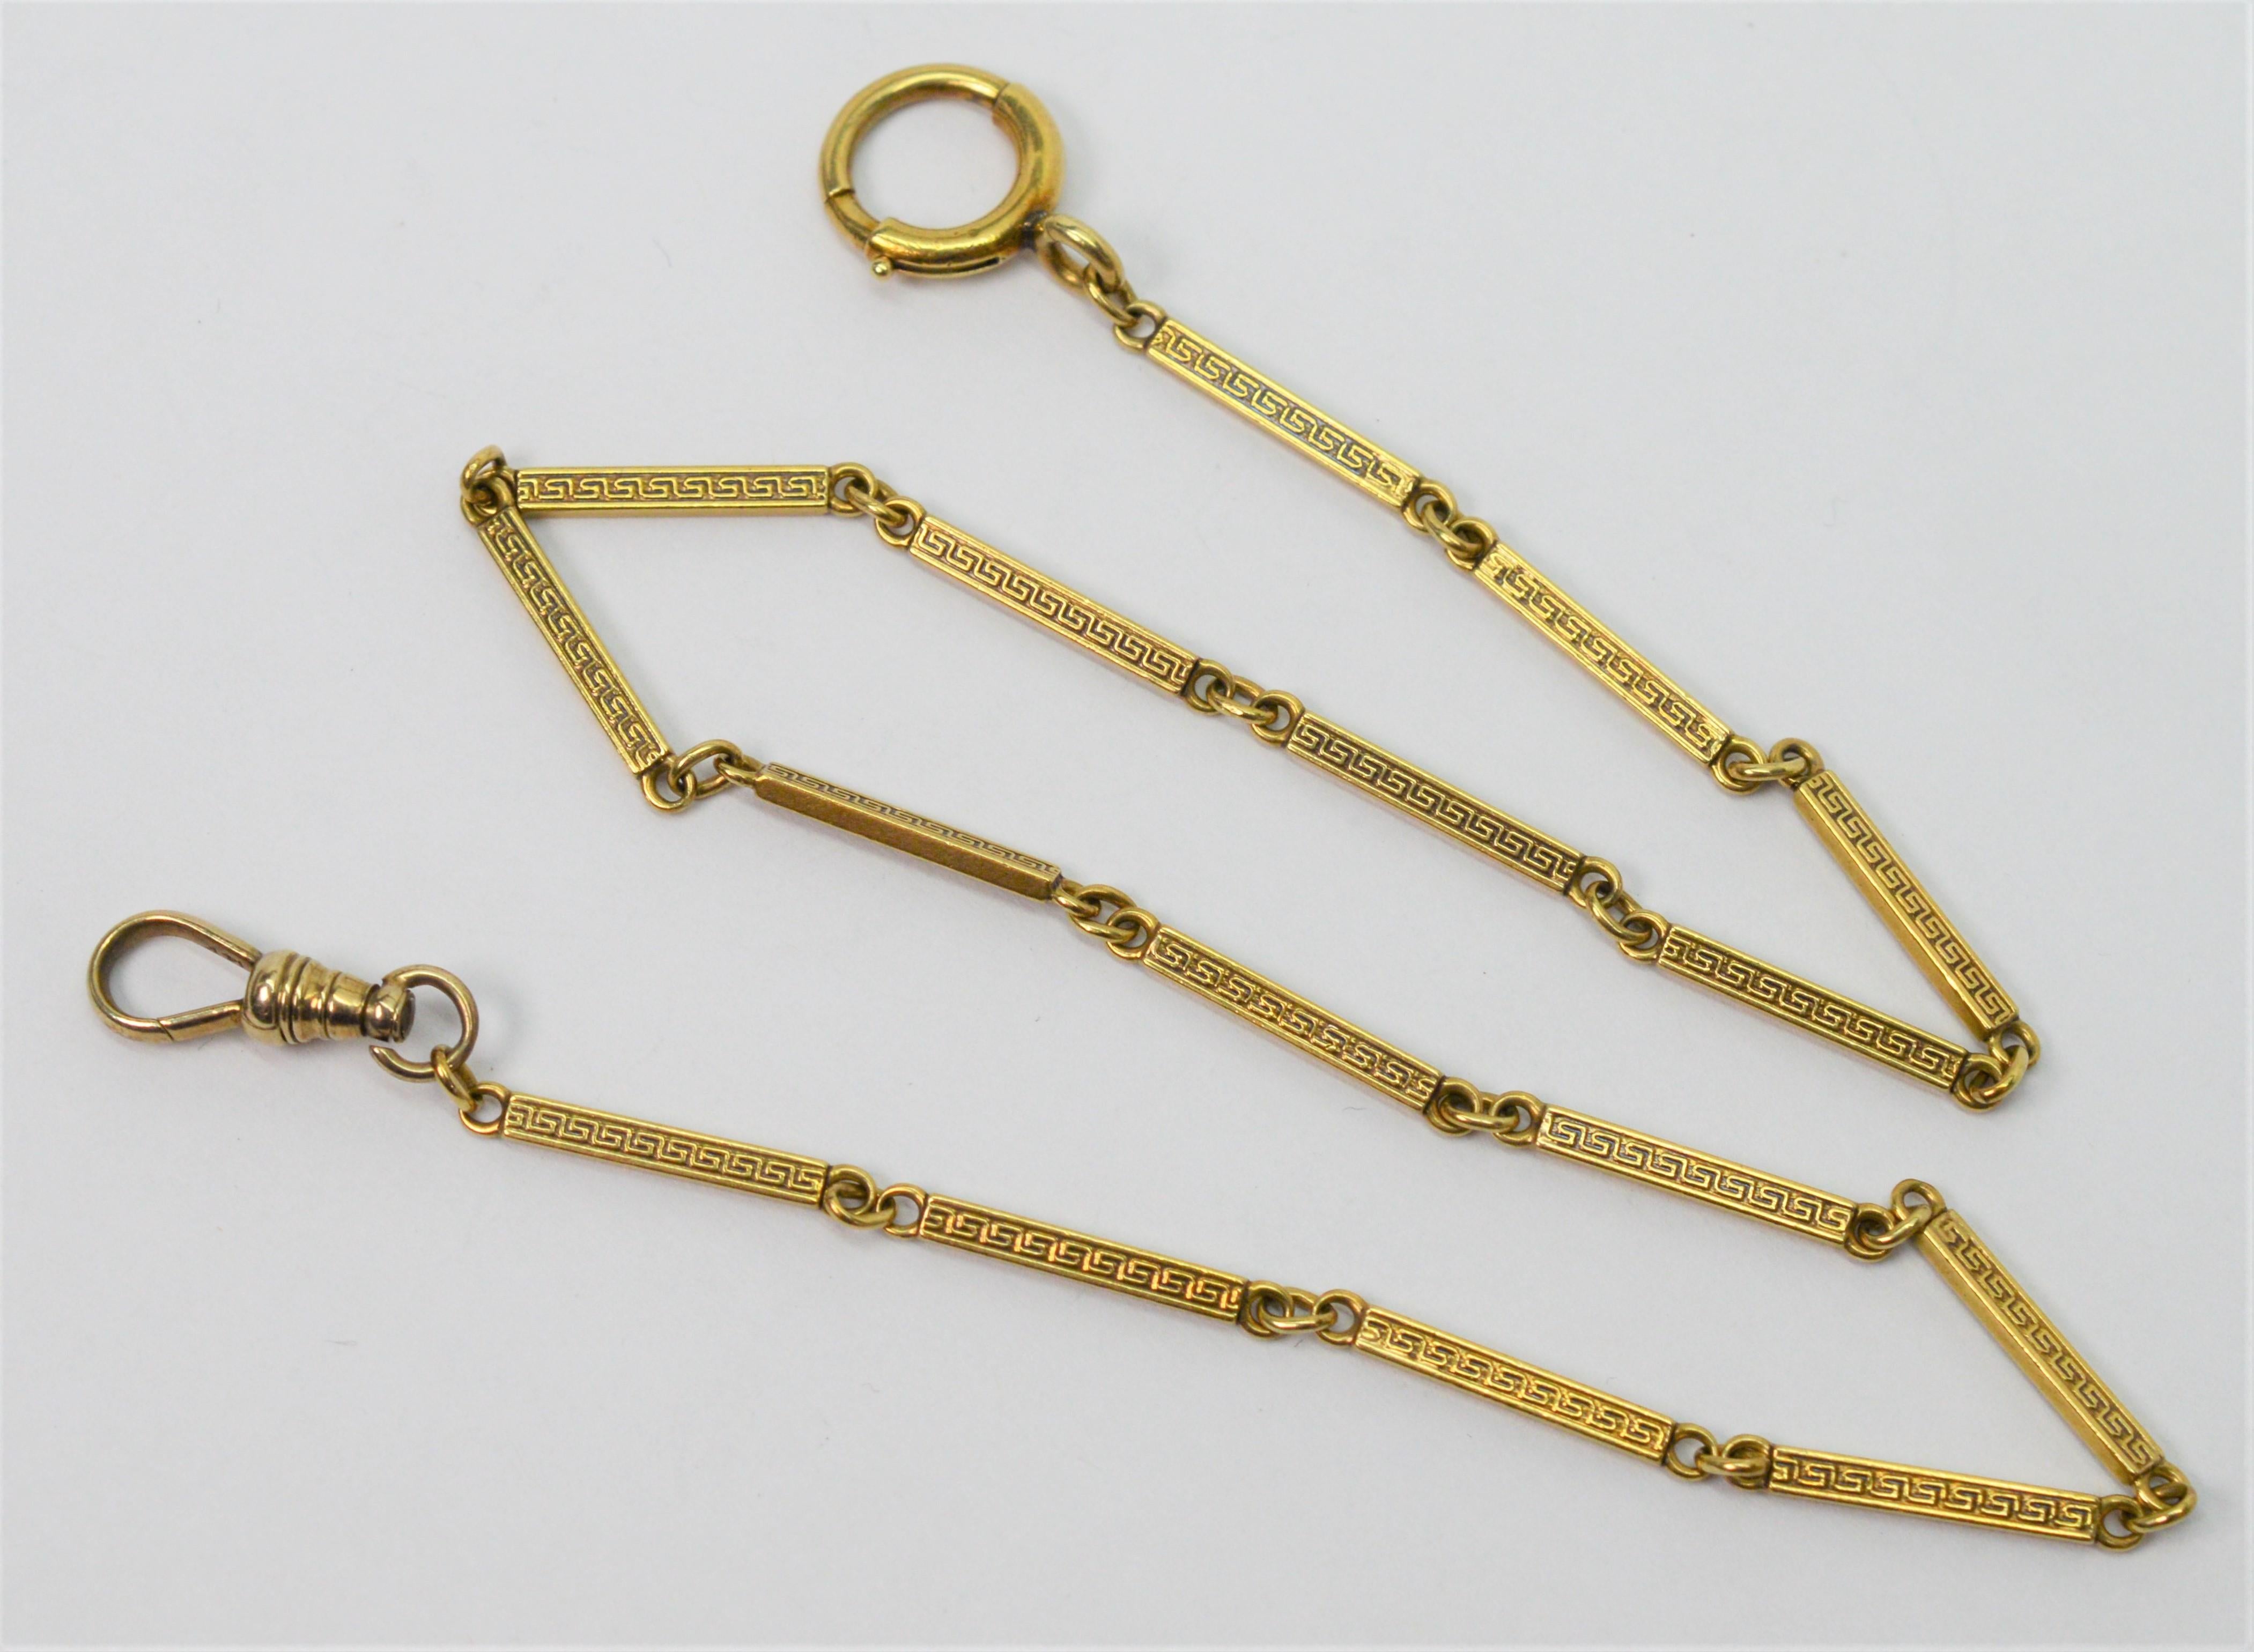 Made in fourteen karat 14K yellow gold with soft antique toning, this pocket watch chain is nicely appointed with an attractive Greek border design that appears
 on the 3/4 inch long links and creates its 15.5 inch length. The pocket watch chain is